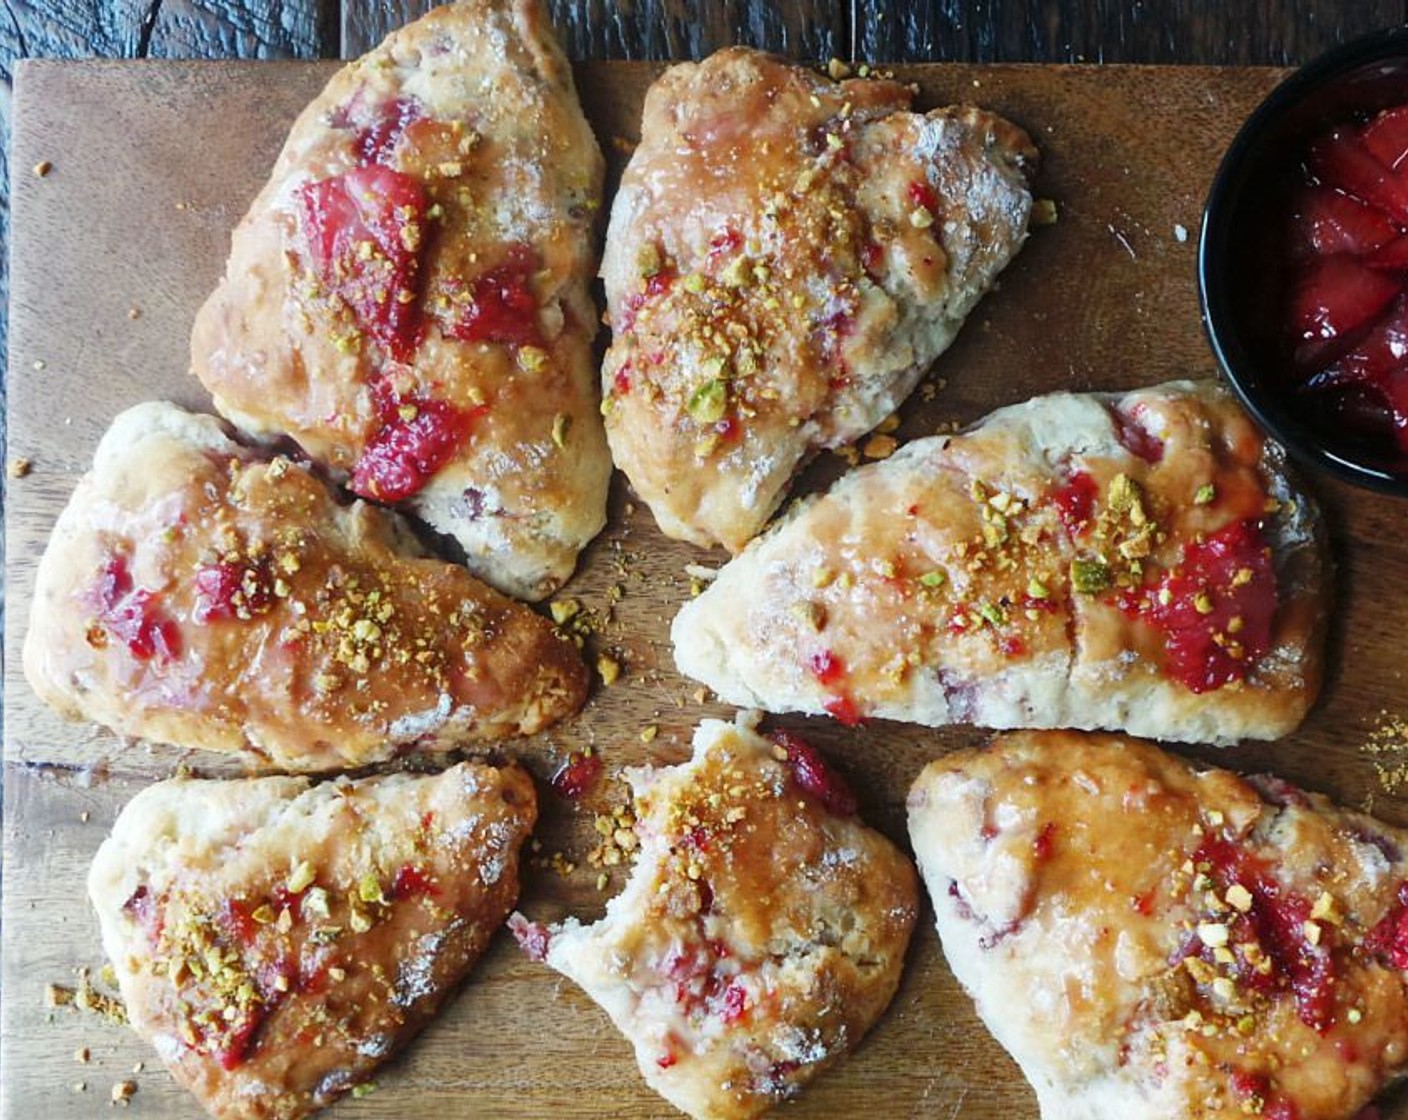 step 13 Top each scone with glaze and sprinkle with chopped pistachio. Enjoy!